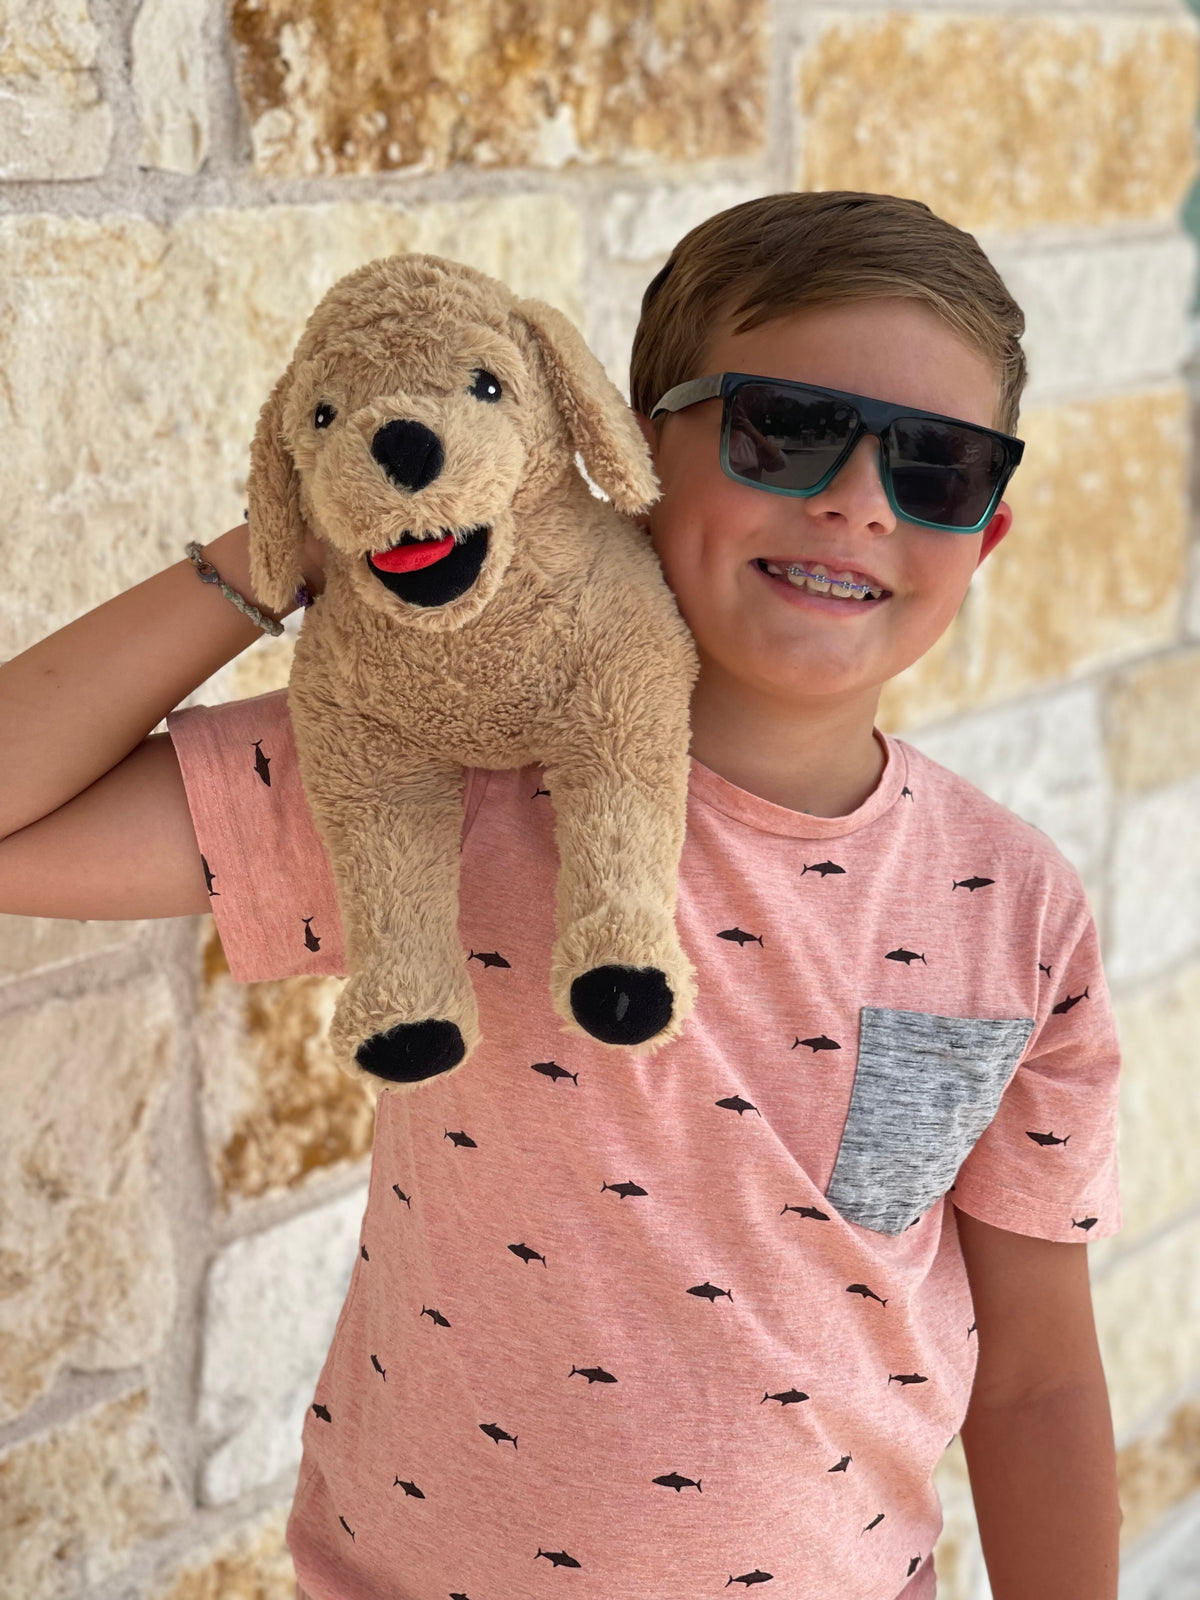 Little boy with his Leo the Pup is a weighted stuffed animal on his shoulder